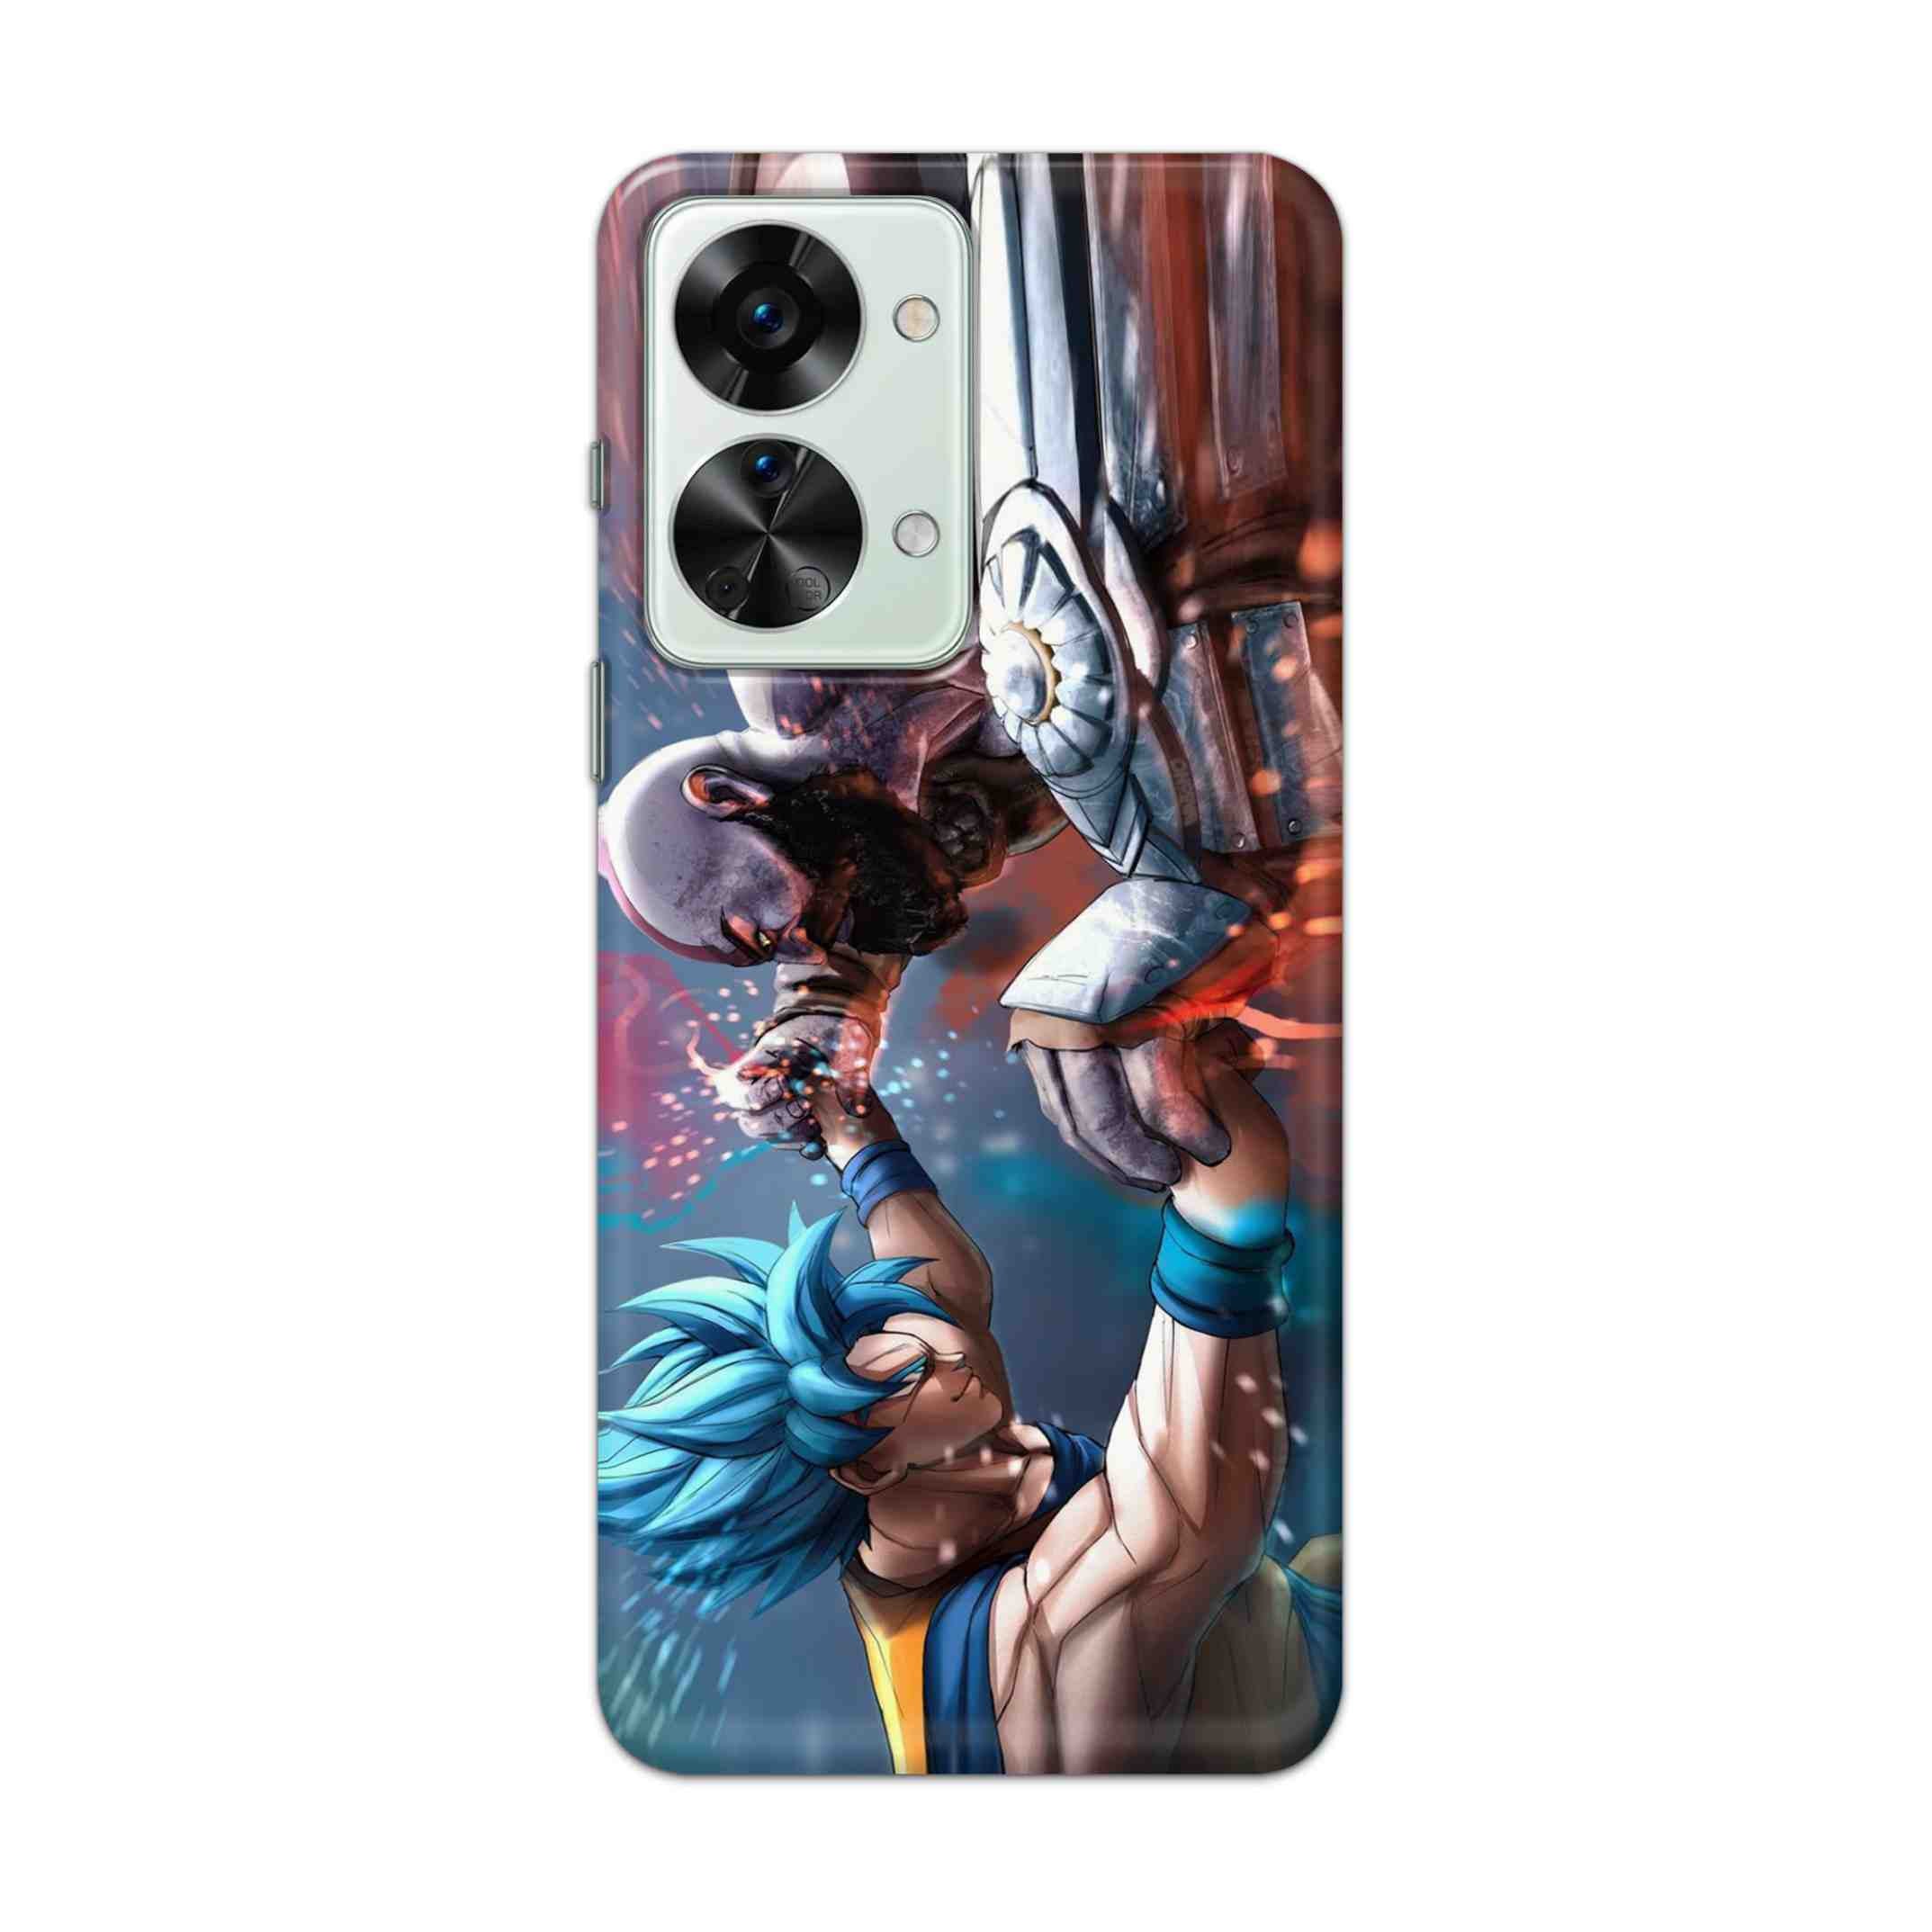 Buy Goku Vs Kratos Hard Back Mobile Phone Case Cover For OnePlus Nord 2T 5G Online